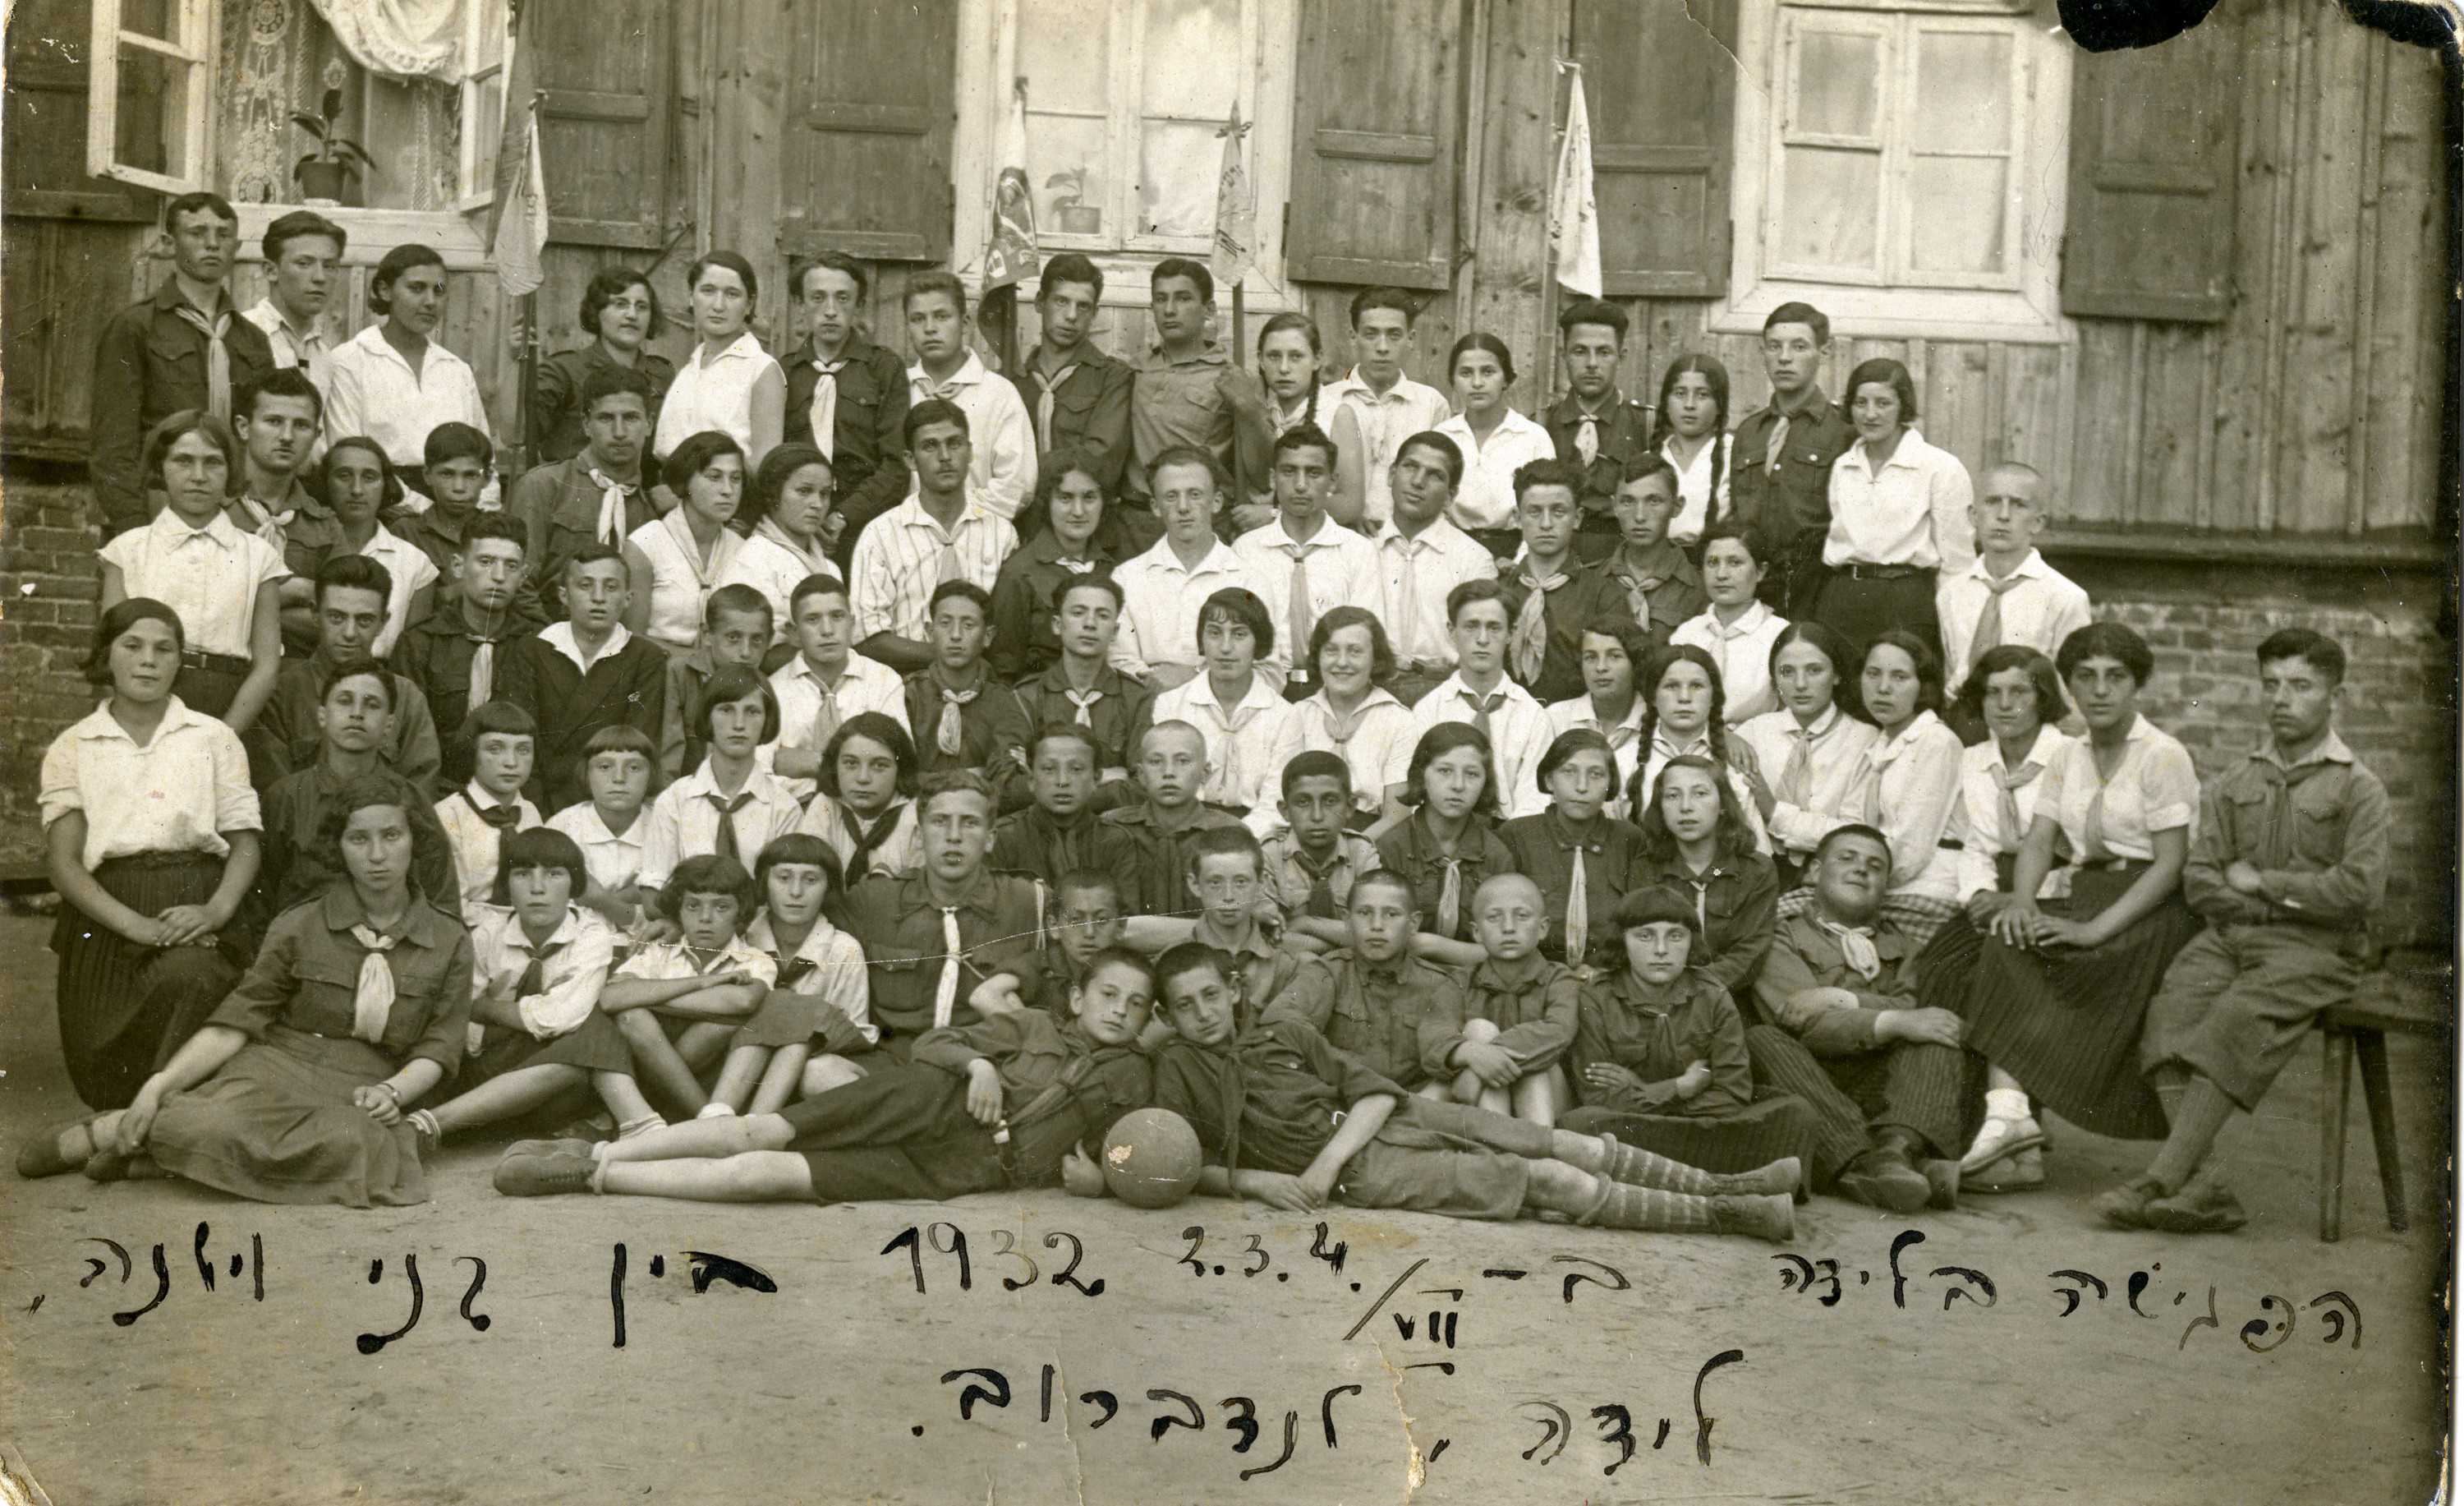 Group photograph of the meeting of youth groups from Vilna and Lida, Poland.

It was at this meeting that Sheyna Muller and Israel Virshup met.  They would be married several years later.